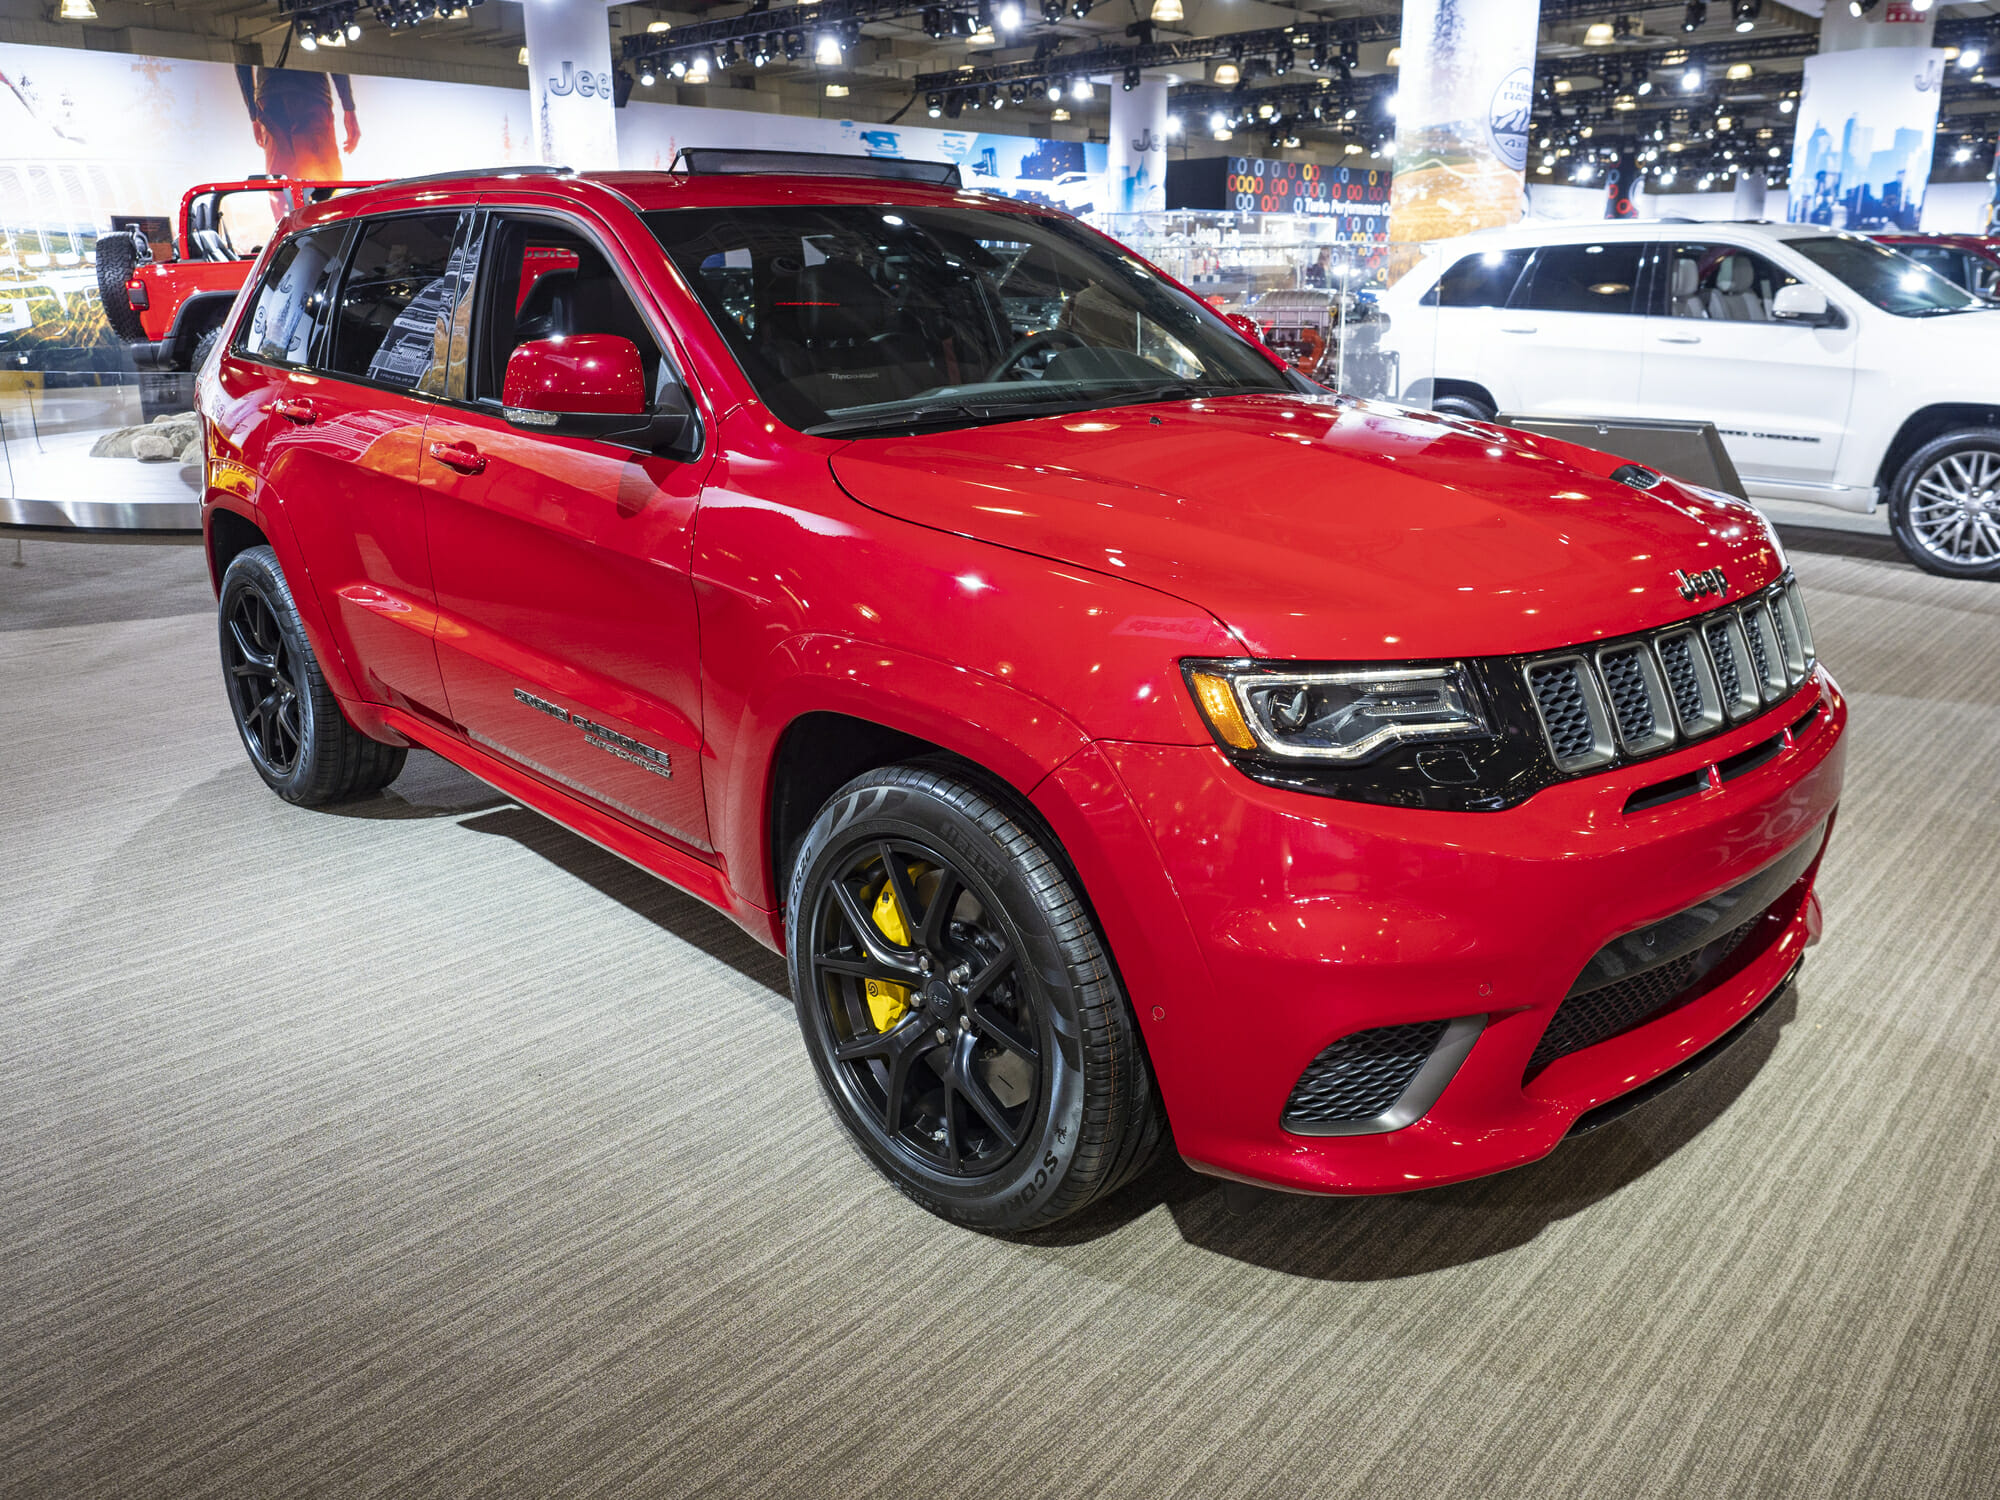 Red Jeep Trackhawk at auto show - Vehicle History